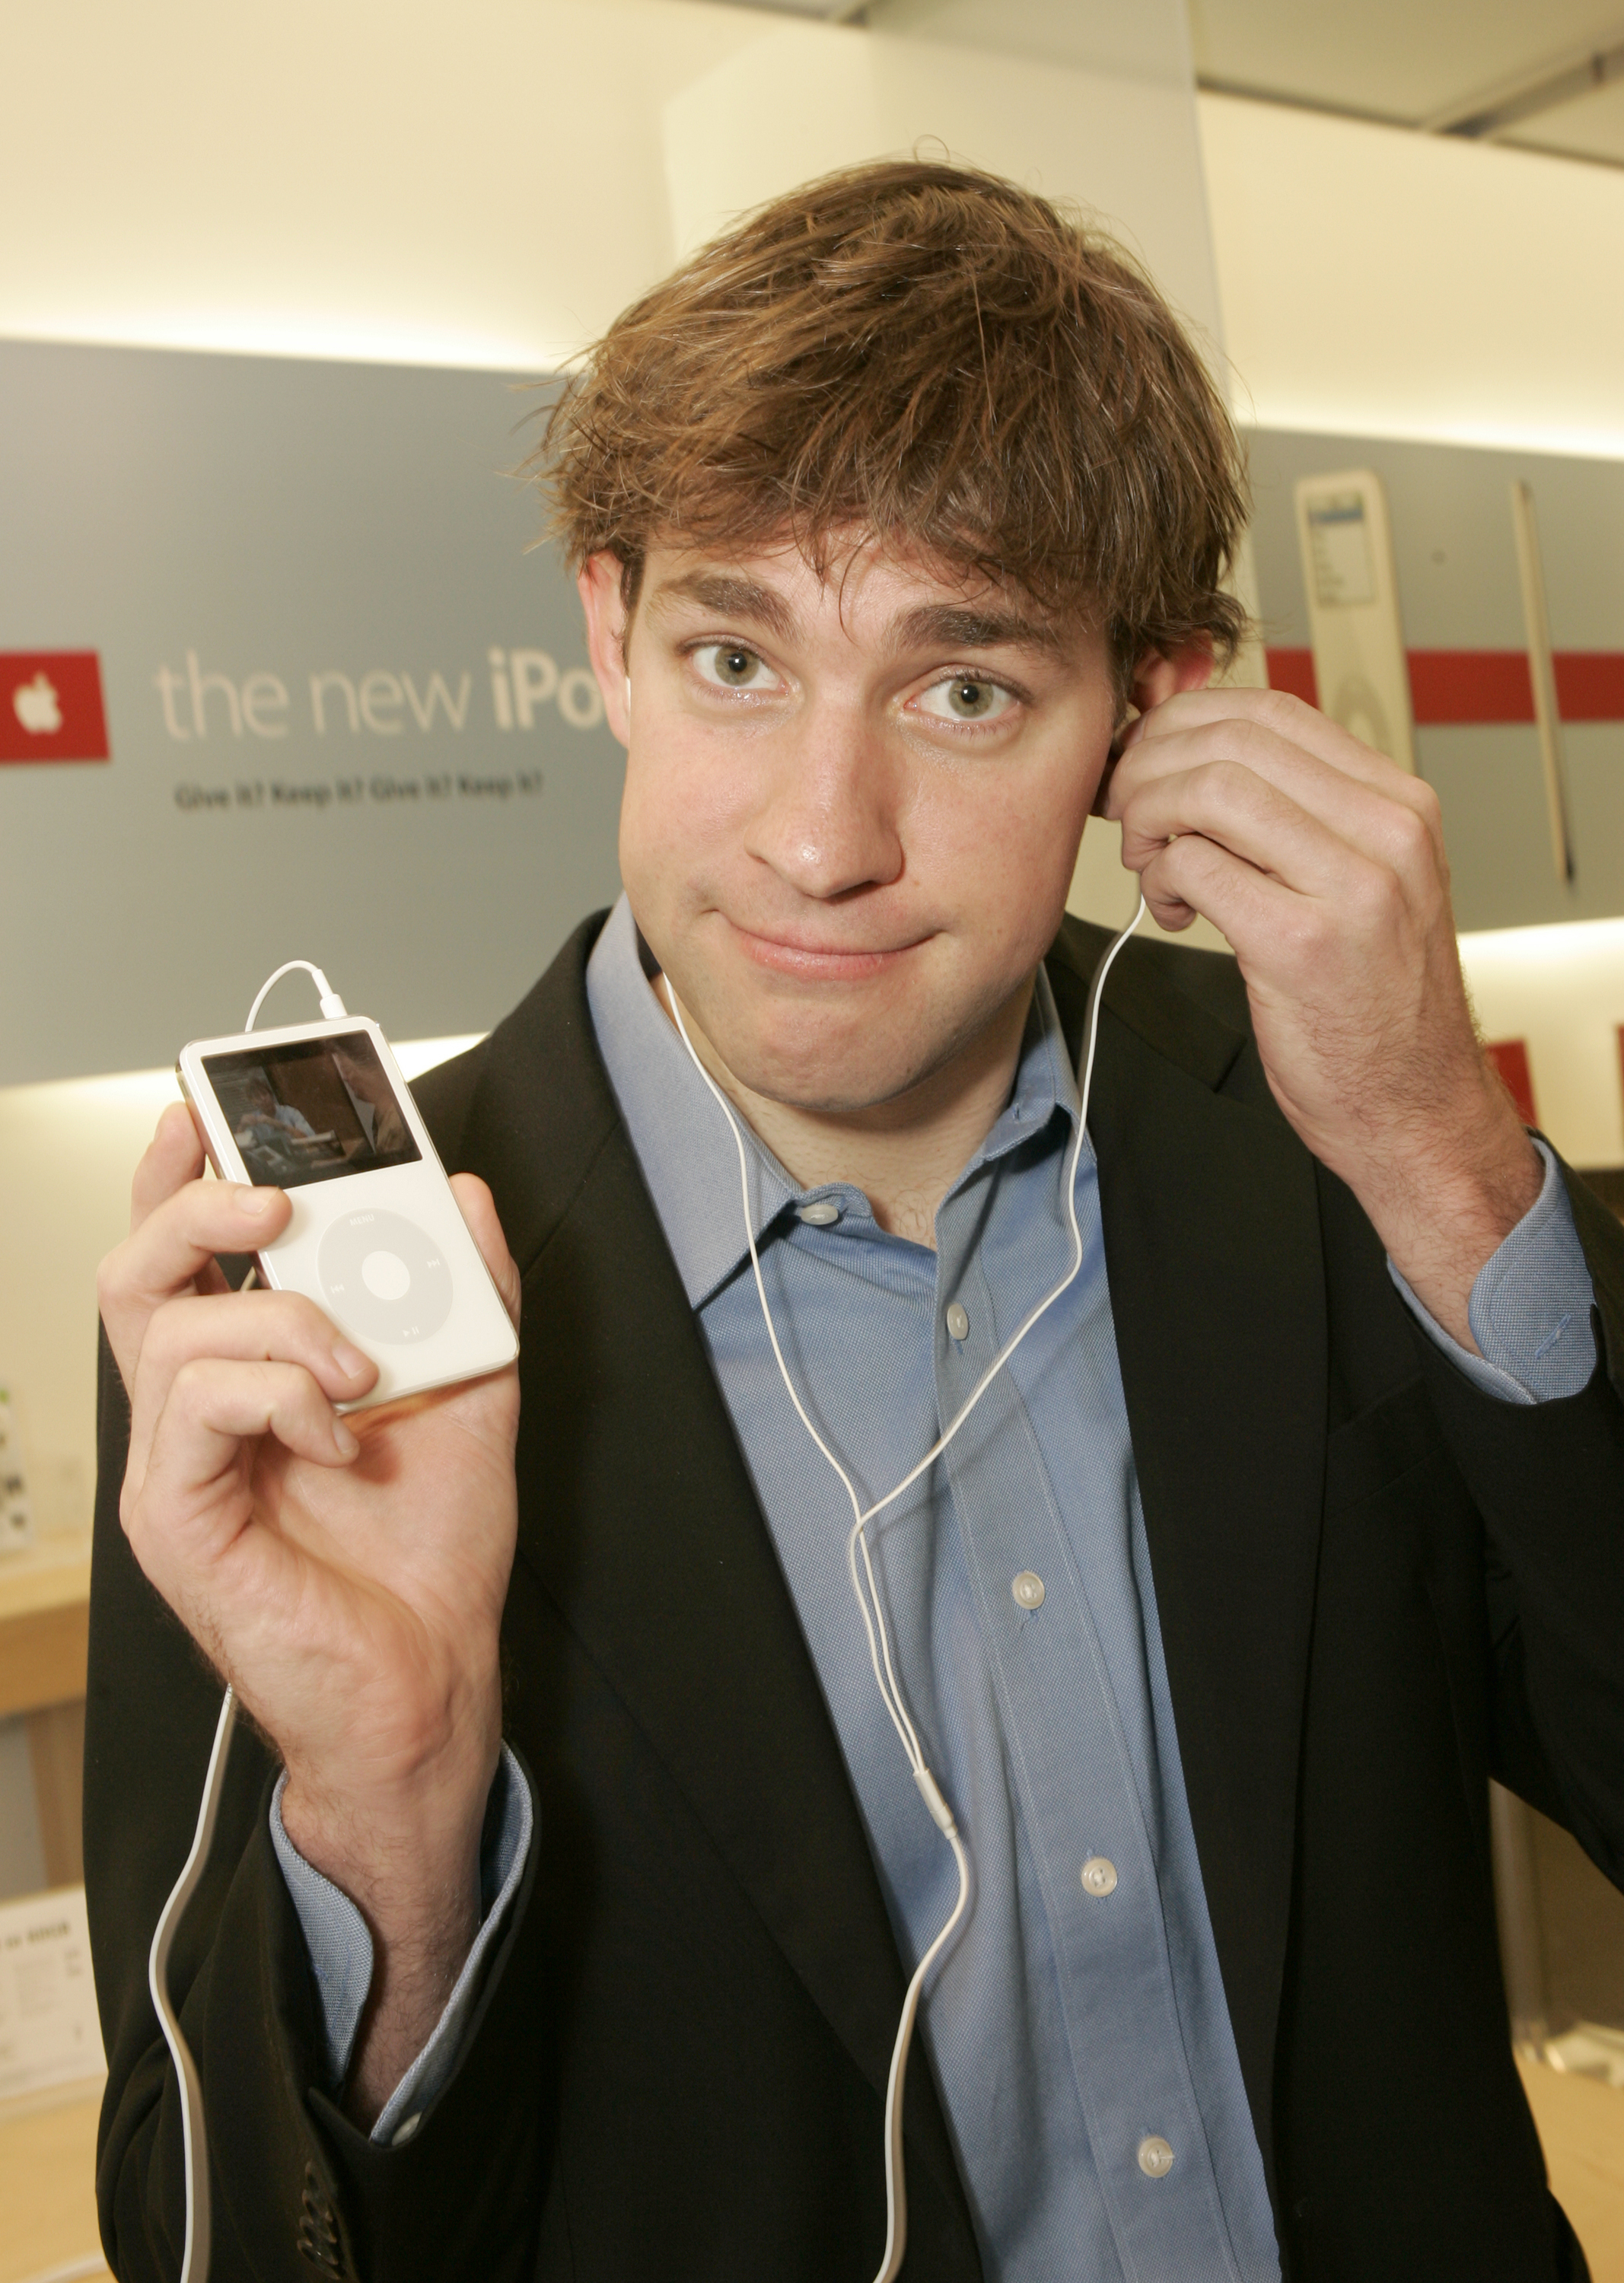 John Krasinski, Co-Star of NBC's Hit Show "The Office," Does His Holiday Shopping at The Grove - December 8, 2005